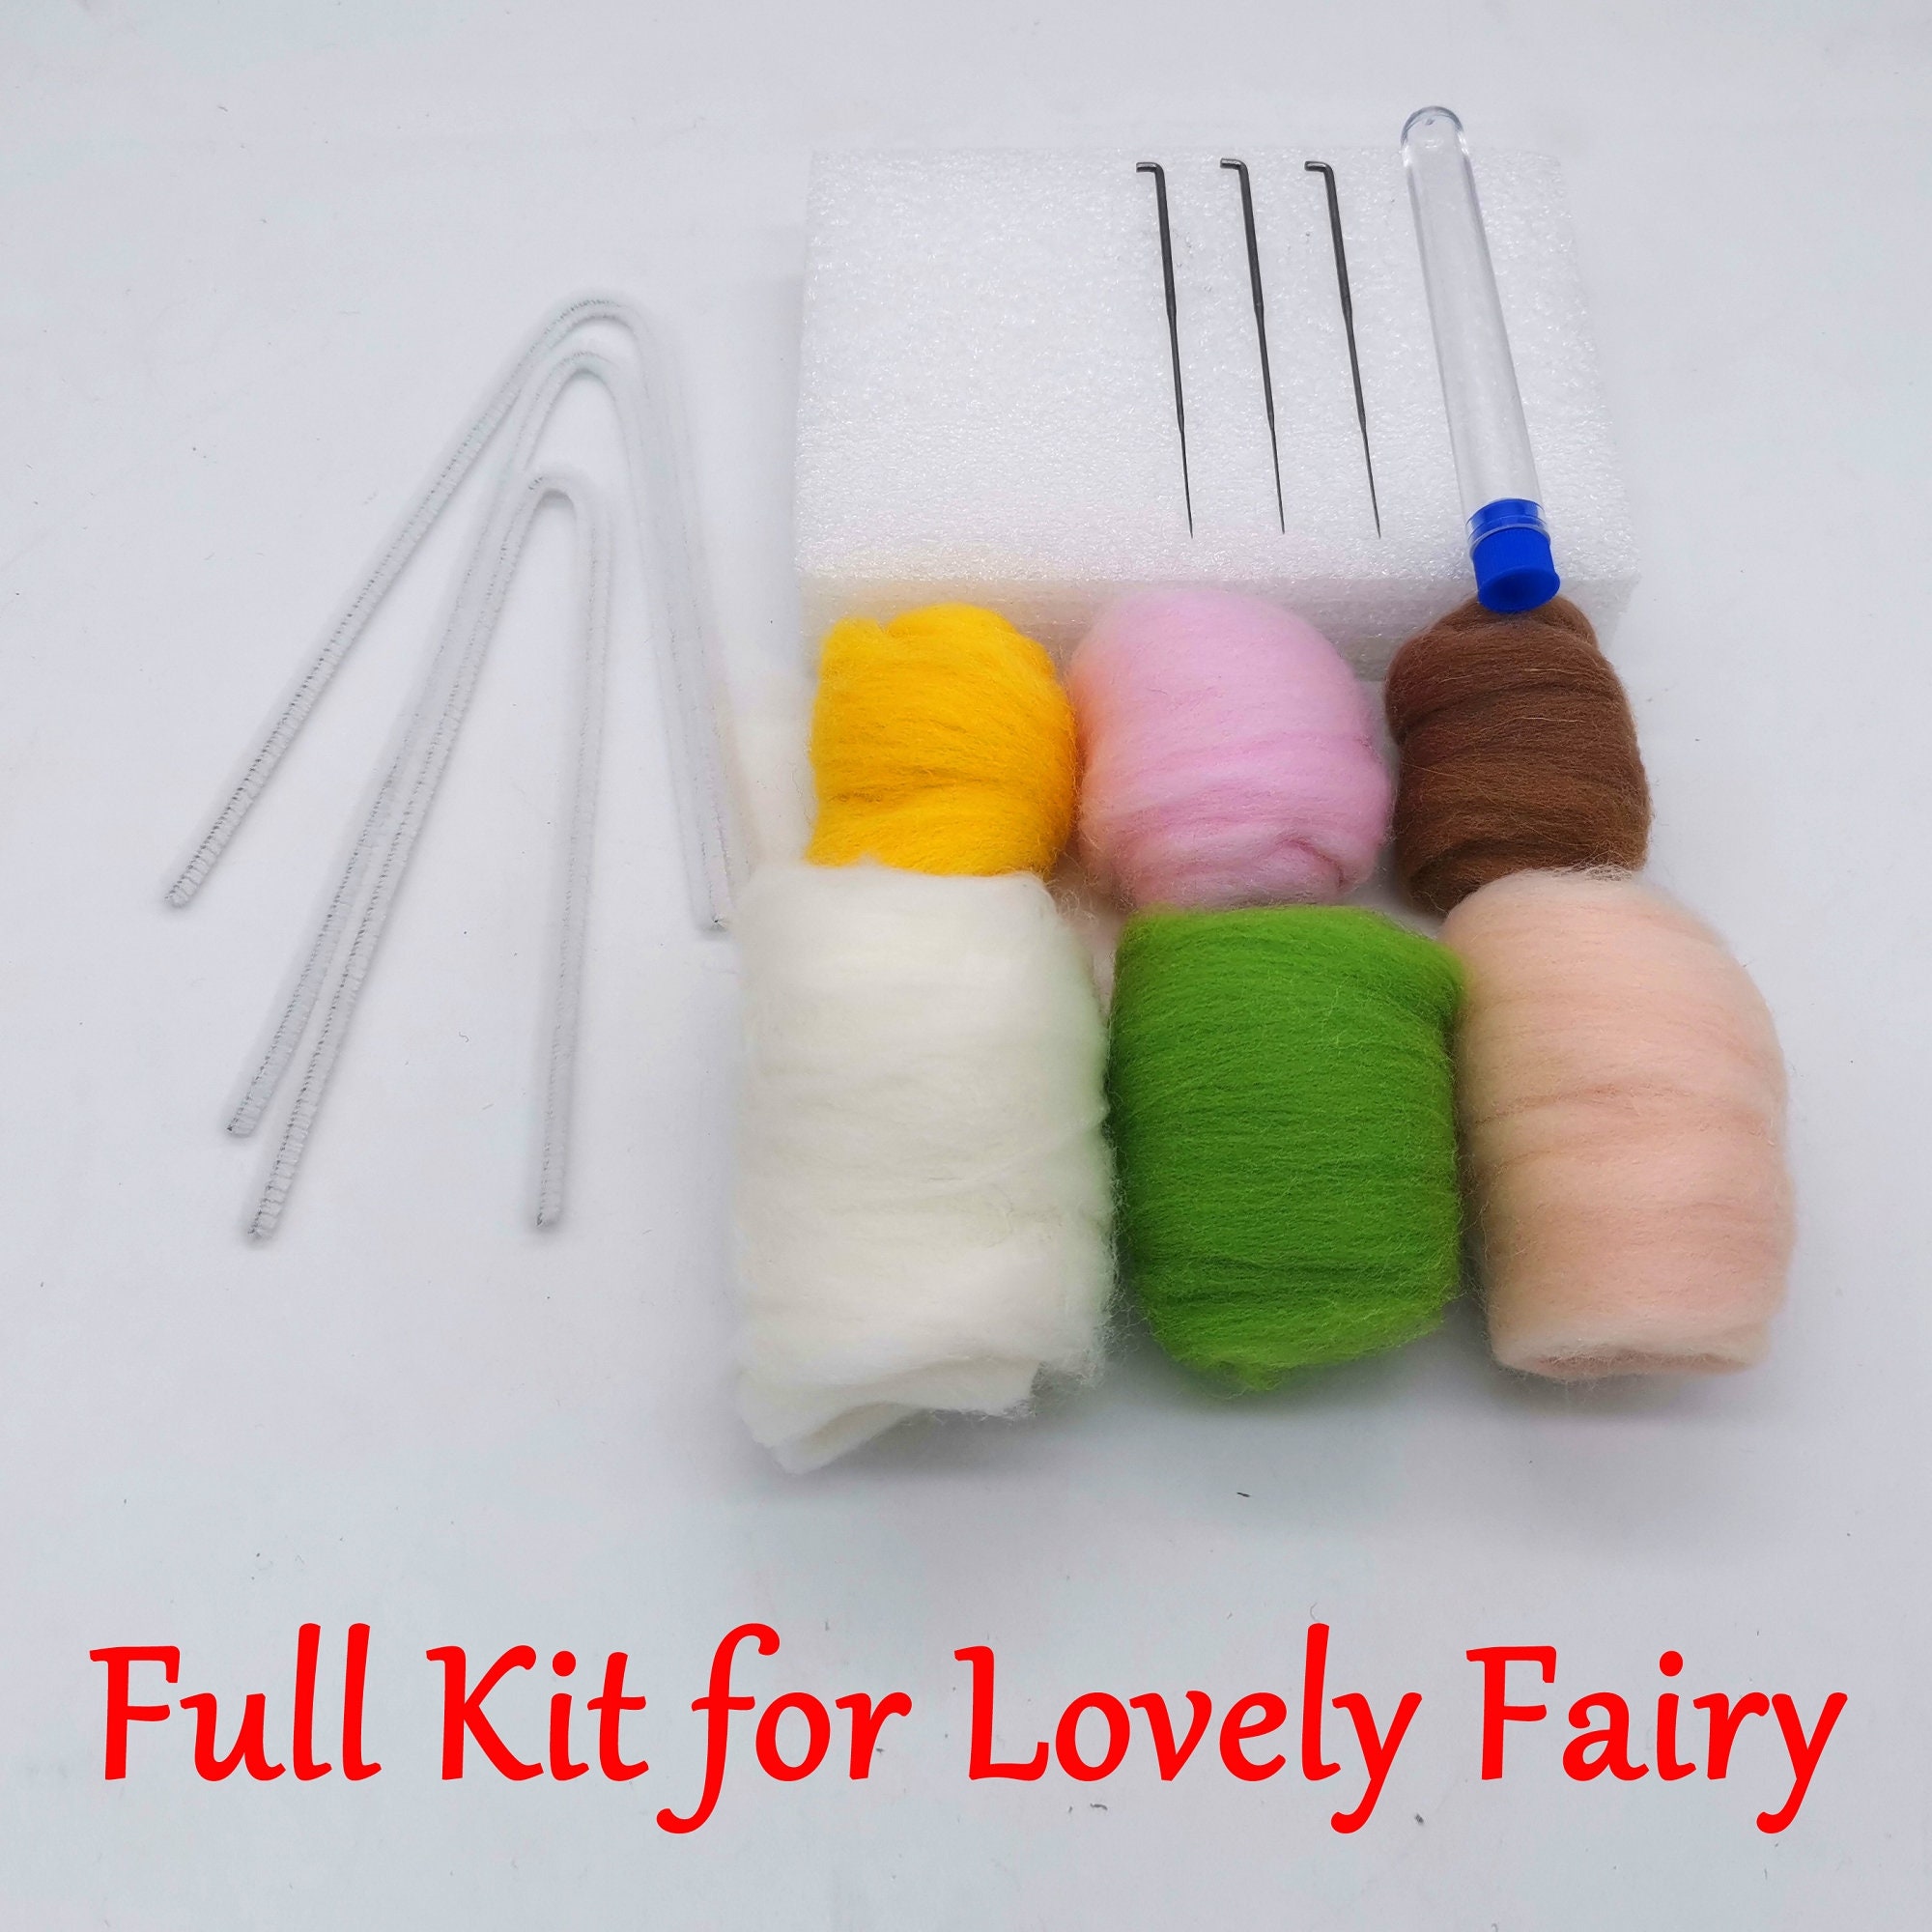 Nativity Felting Kits for Adults Including Everything to Make Christmas  Gift Needle Felting Kits for Beginners Height 4 Inch 10cm 